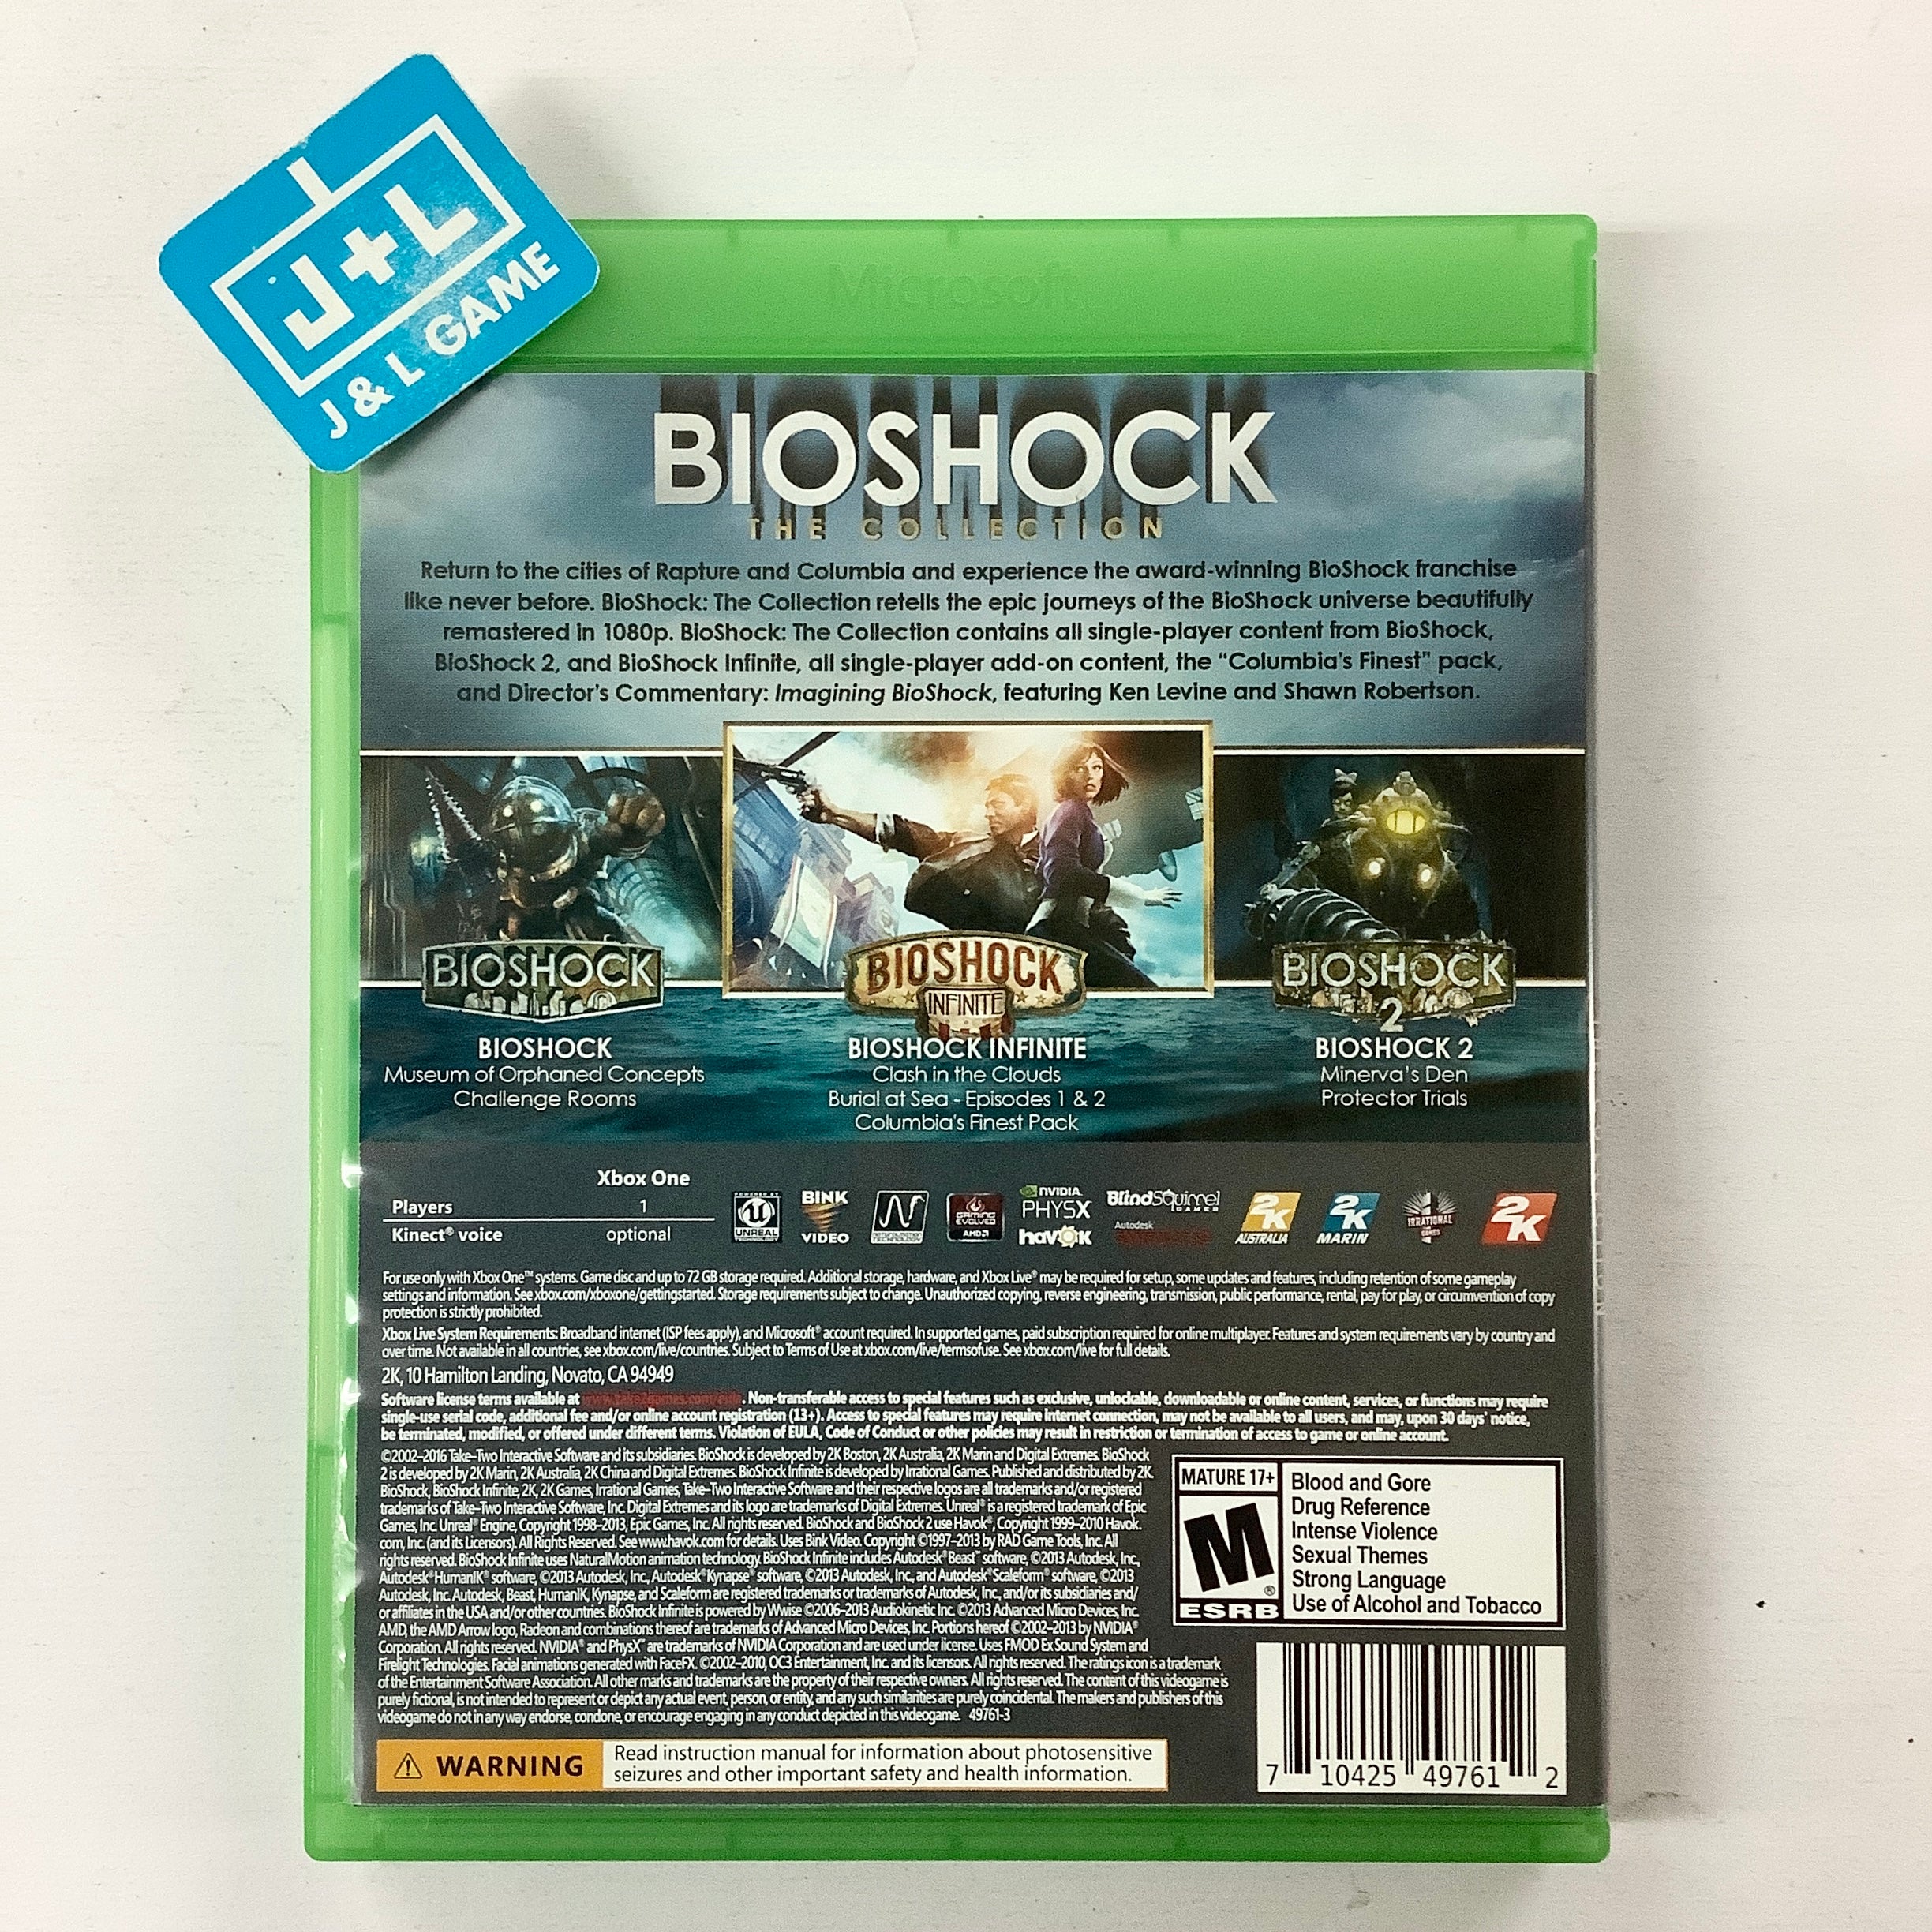 BioShock: The Collection - (XB1) Xbox One [Pre-Owned] Video Games 2K Games   